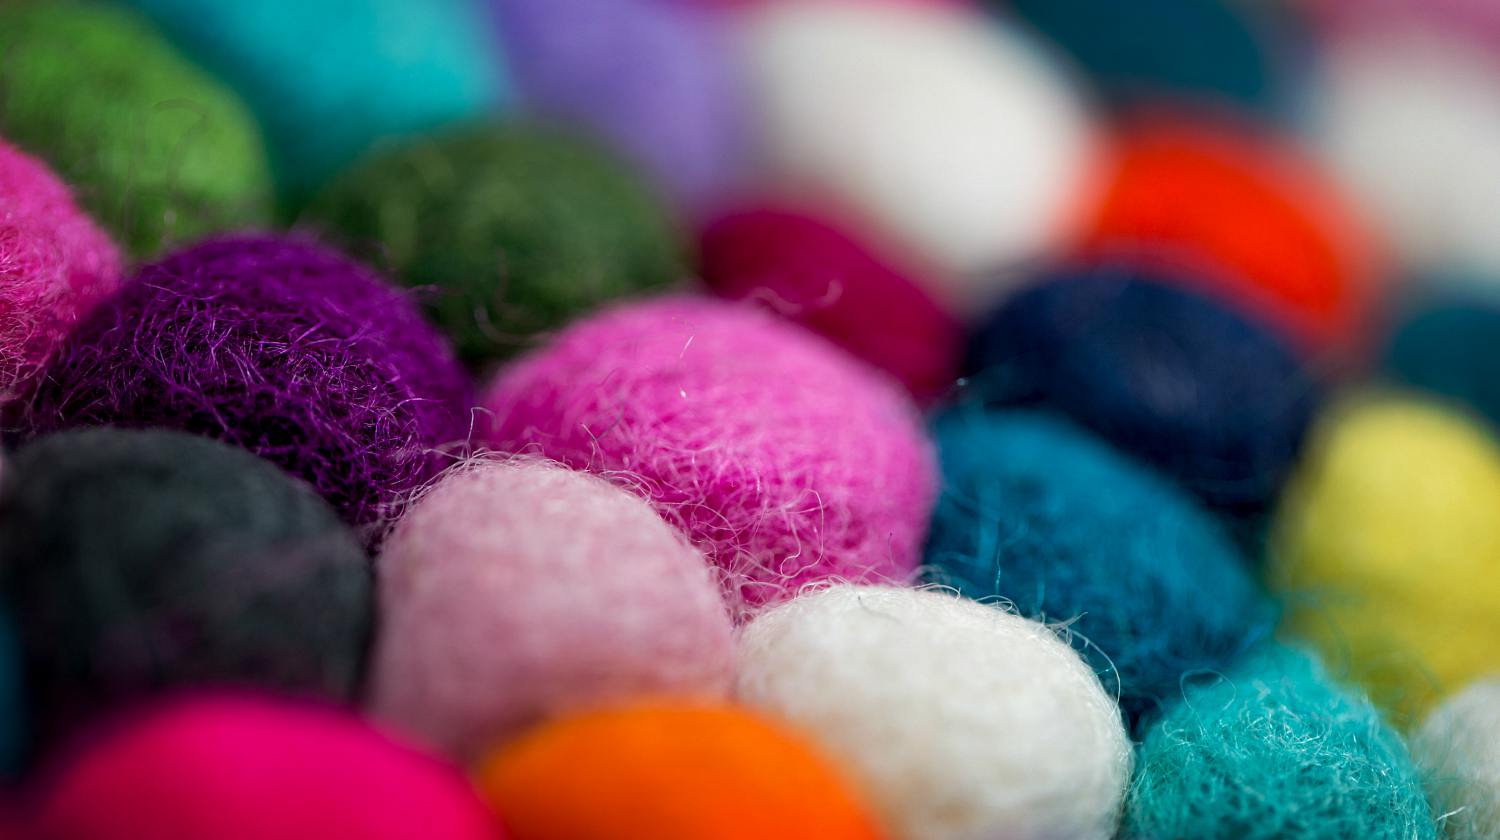 Colorful felt balls | How To Make Felt Balls For Your Next Crafting Projects | Featured